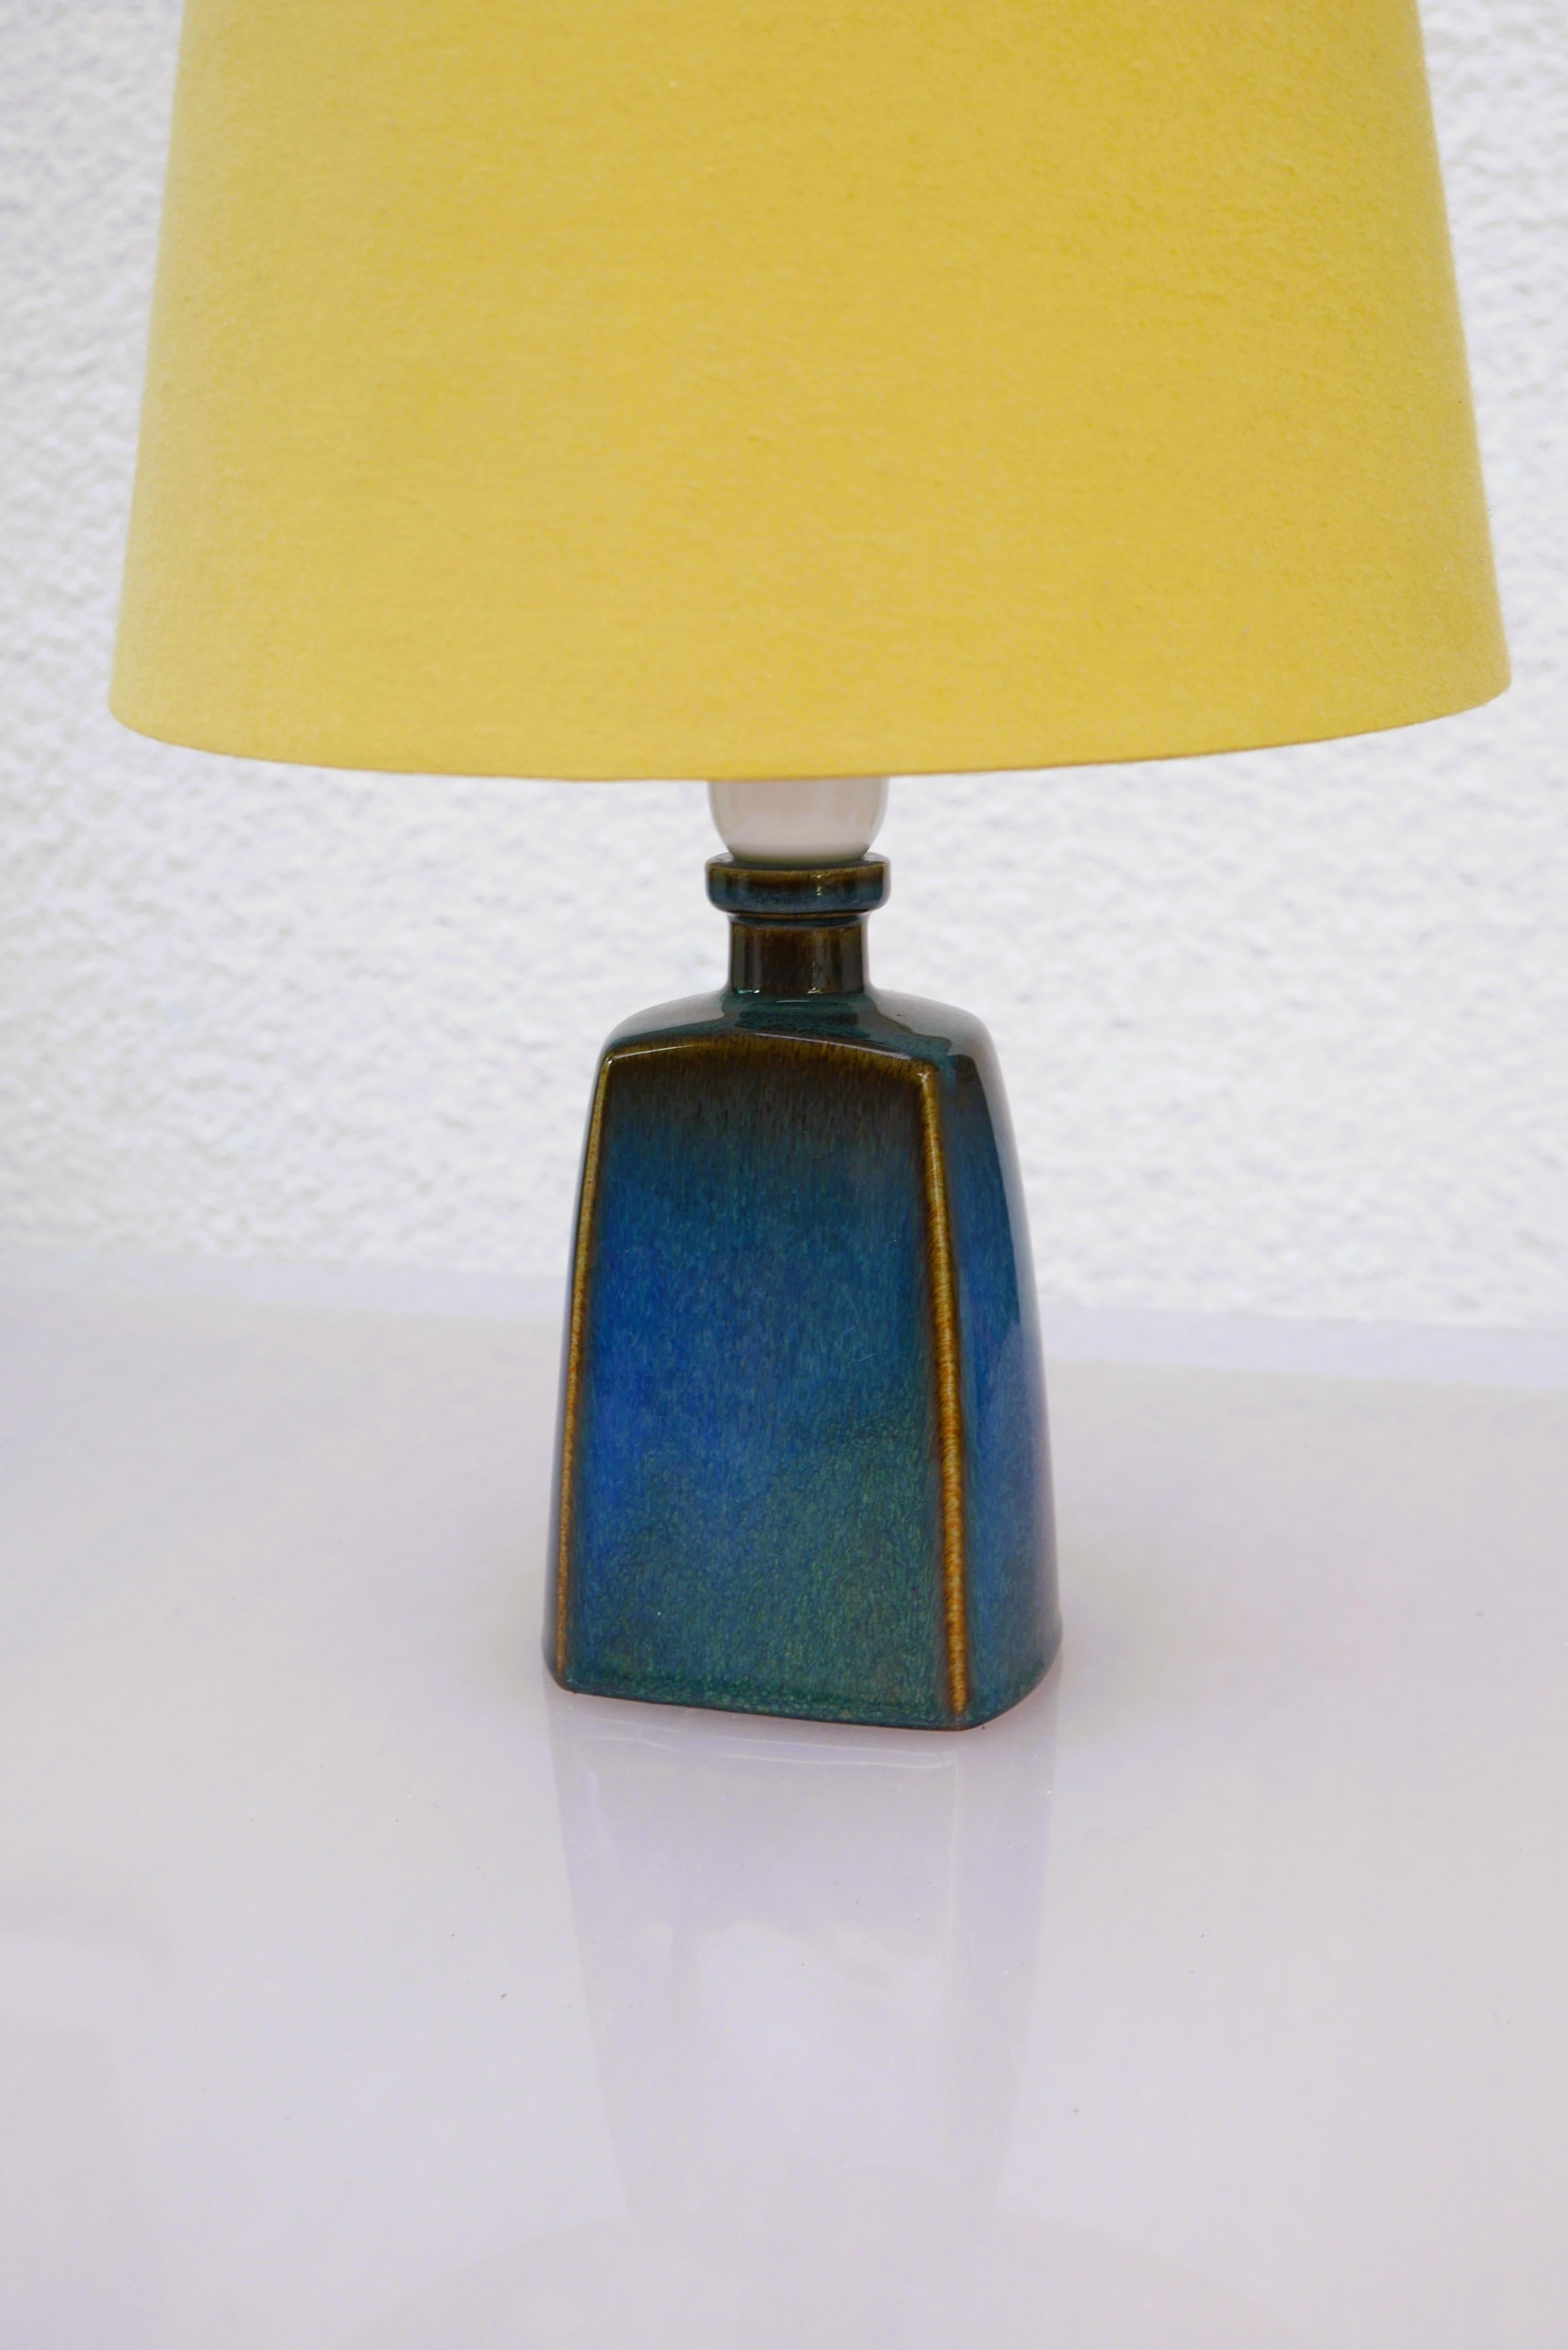 Glazed Mid-century modern pottery lamp base, known as 